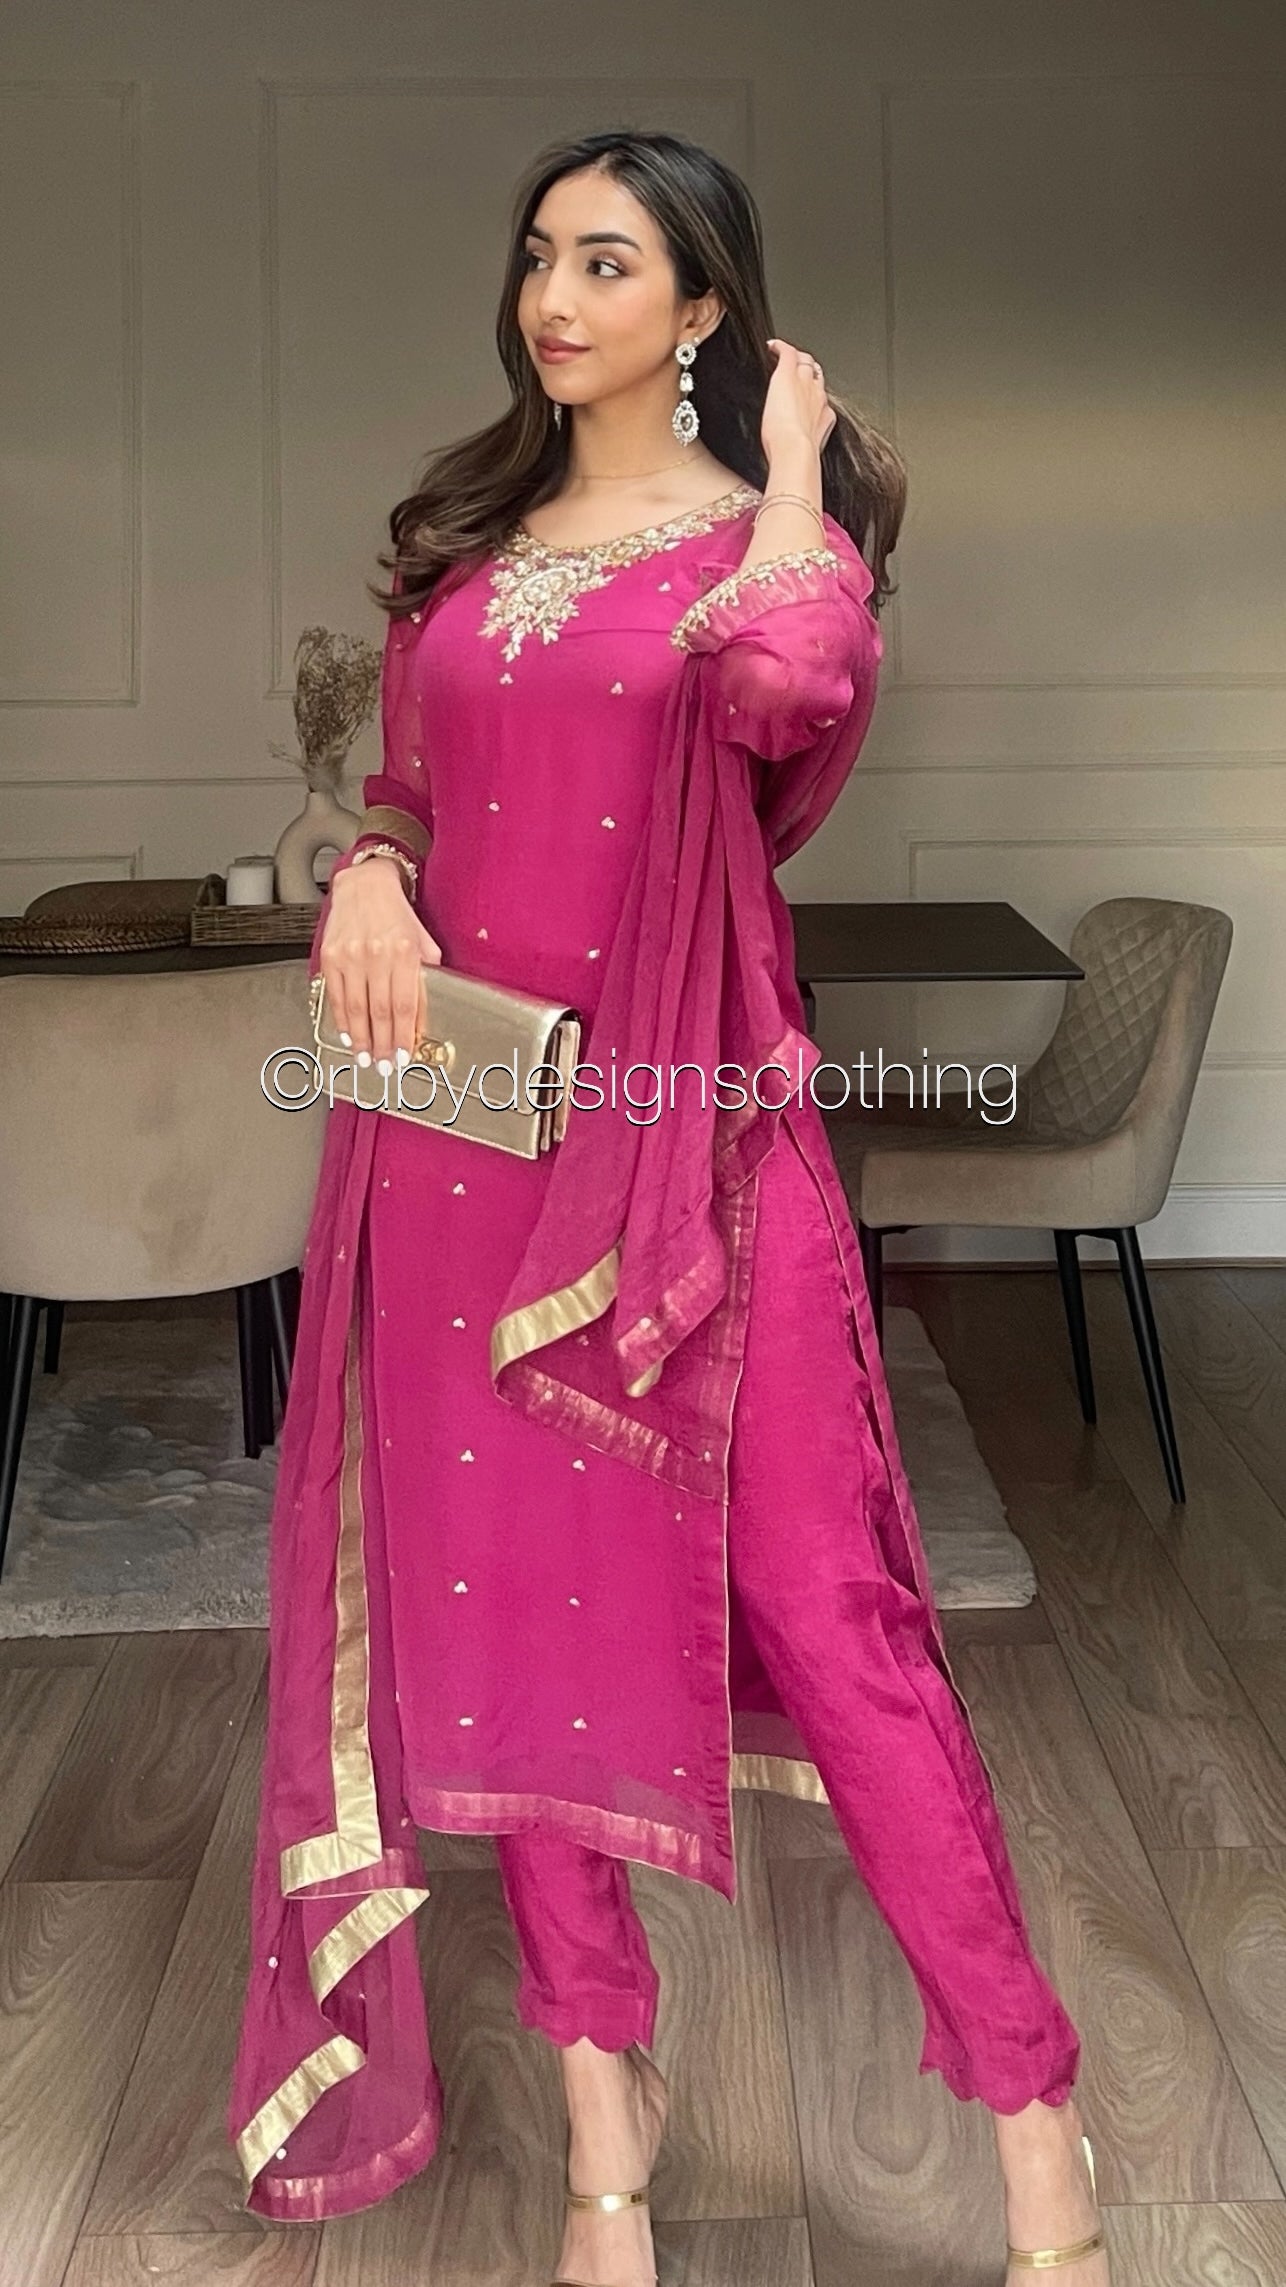 ALVIA Pink - 3 Piece Pink Chiffon Suit with Gold Handwork